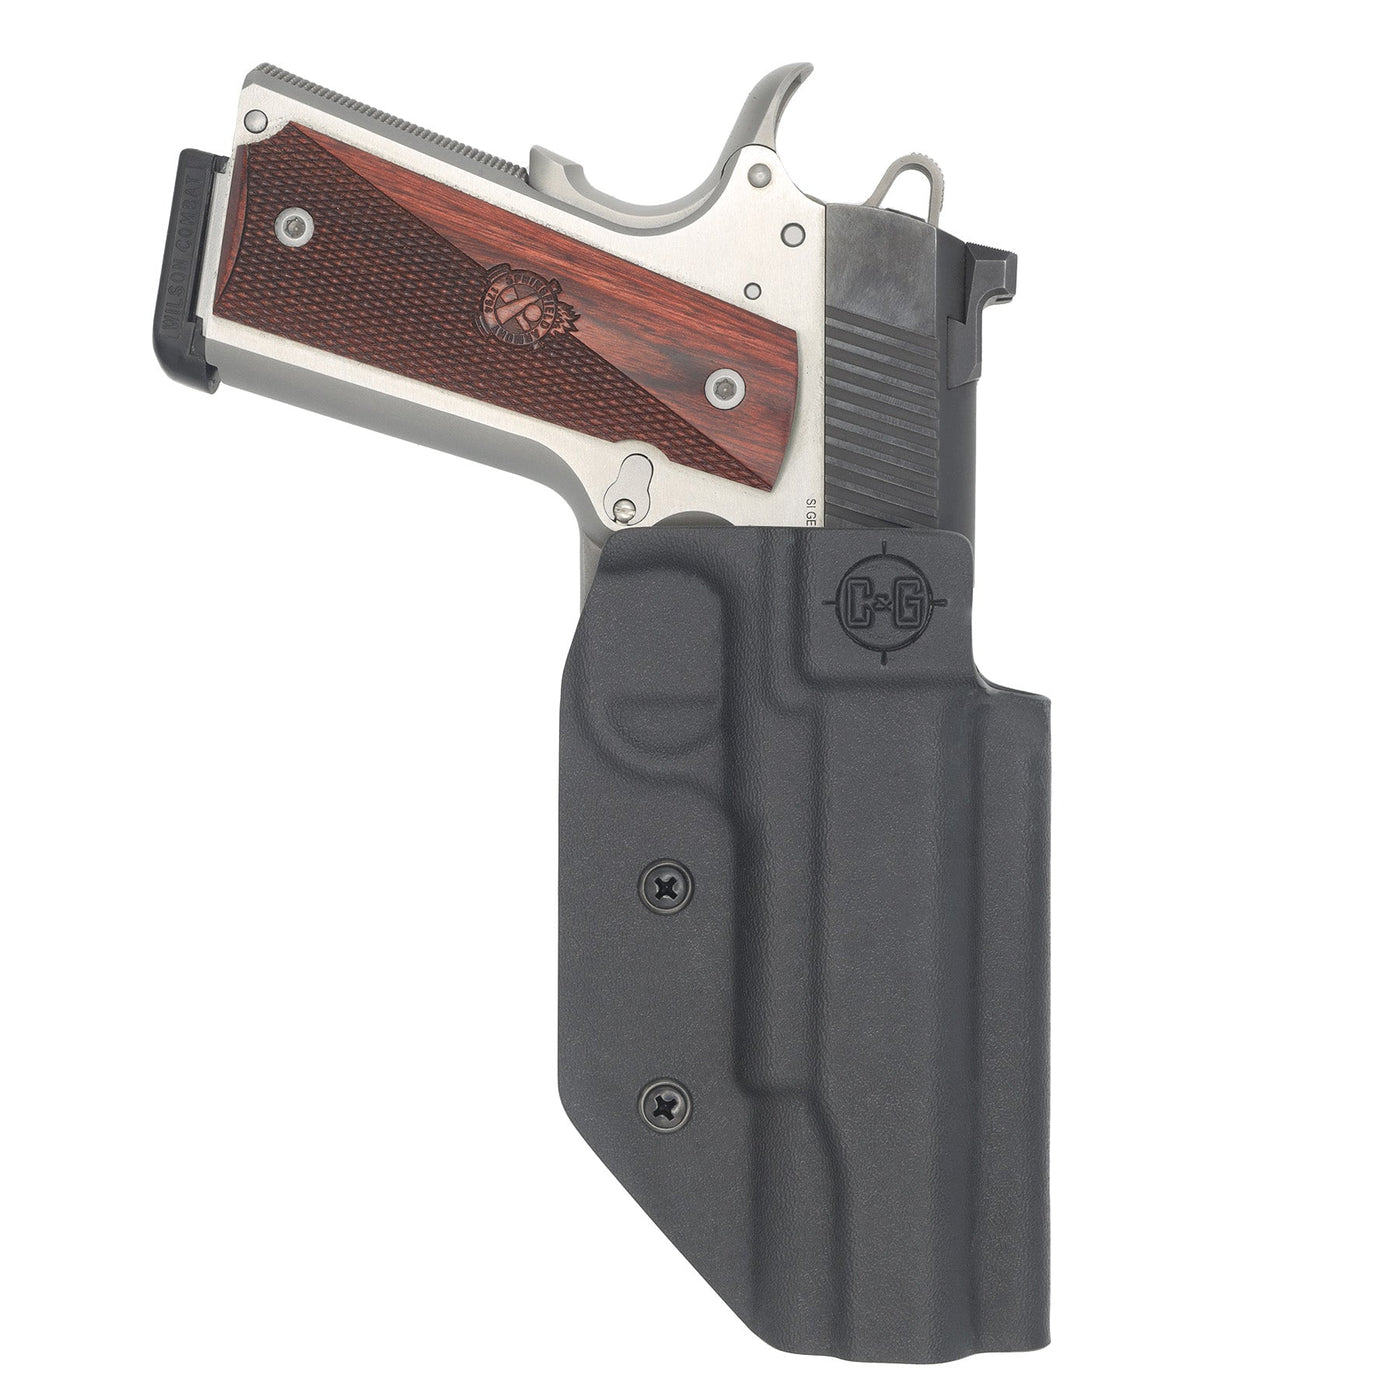 C&G Holsters COMPETITION kydex holster 1911